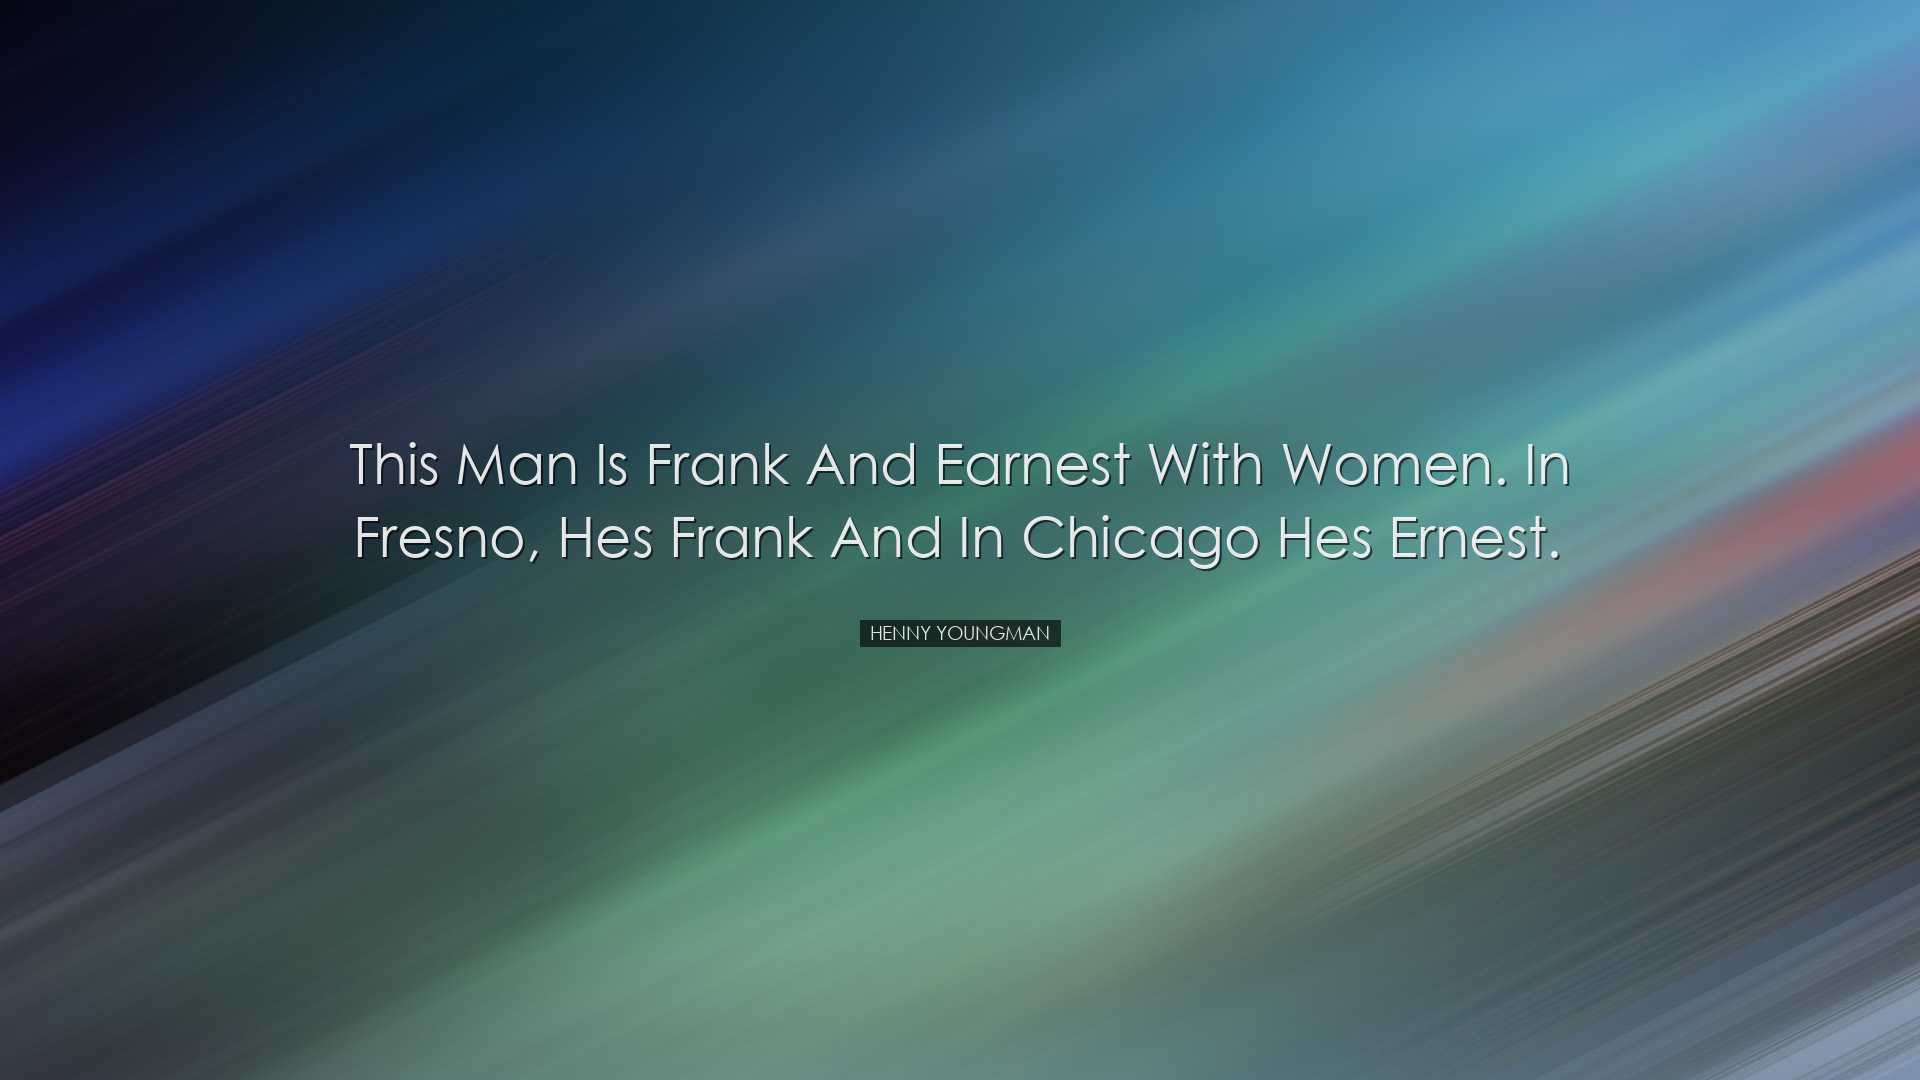 This man is frank and earnest with women. In Fresno, hes Frank and